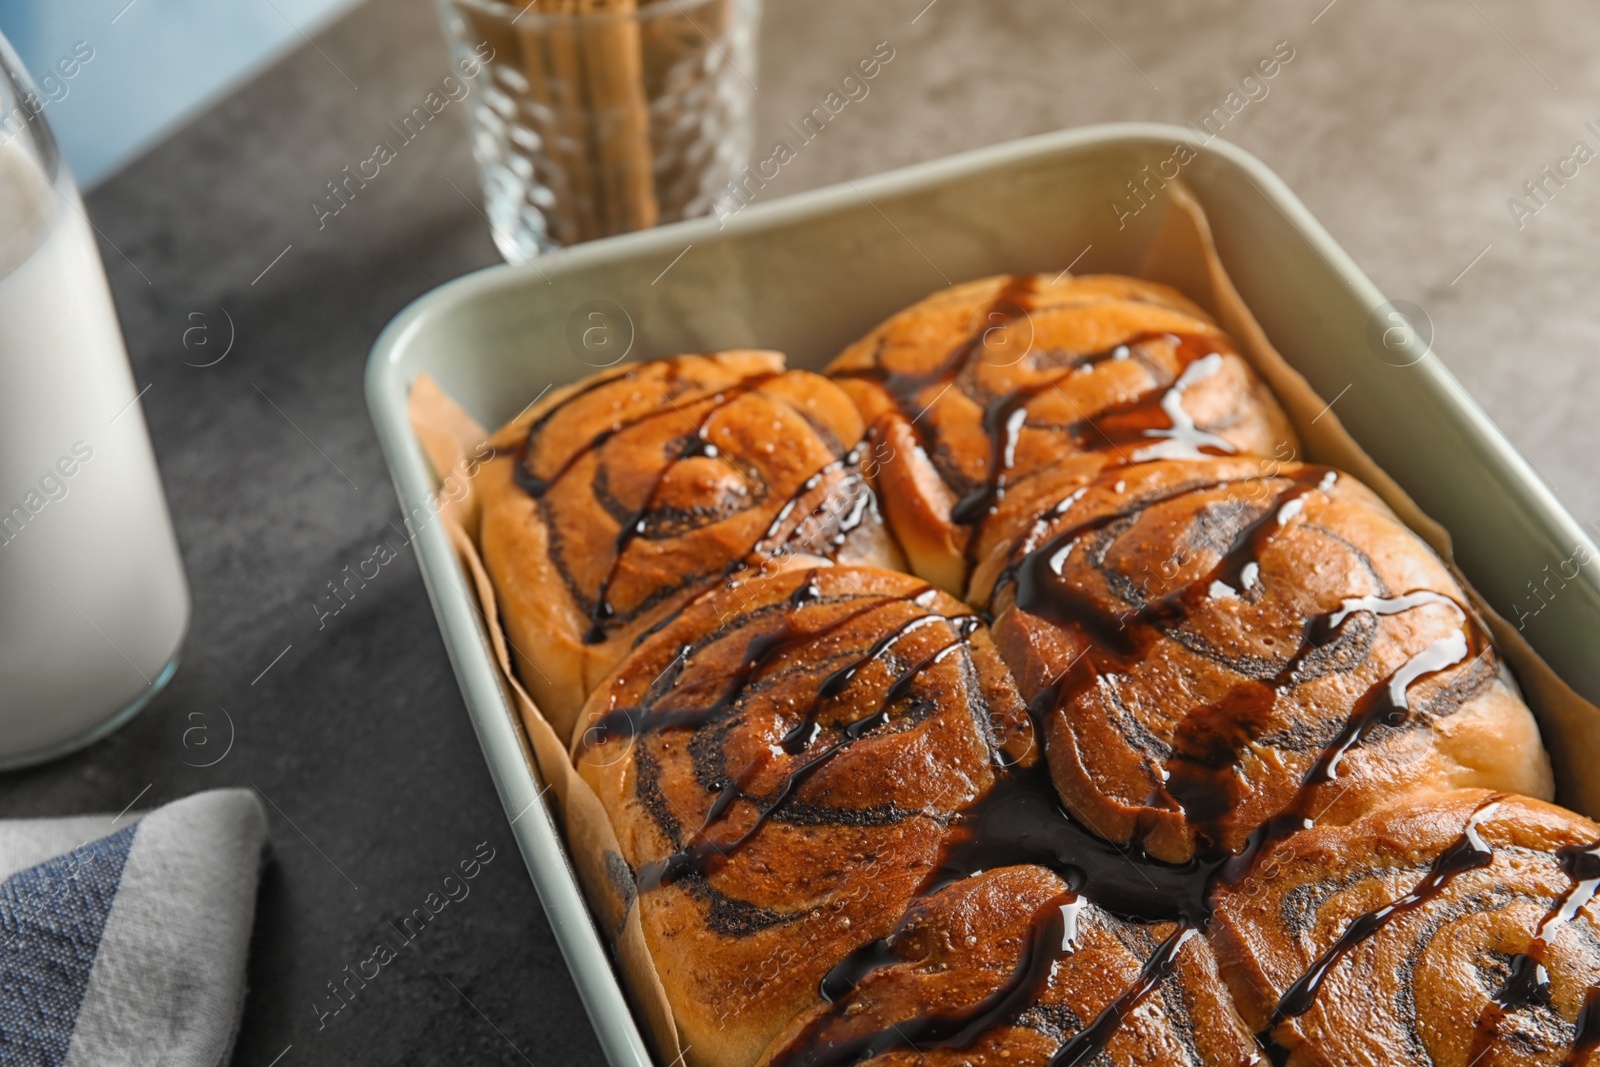 Photo of Baking dish with cinnamon rolls on table, closeup